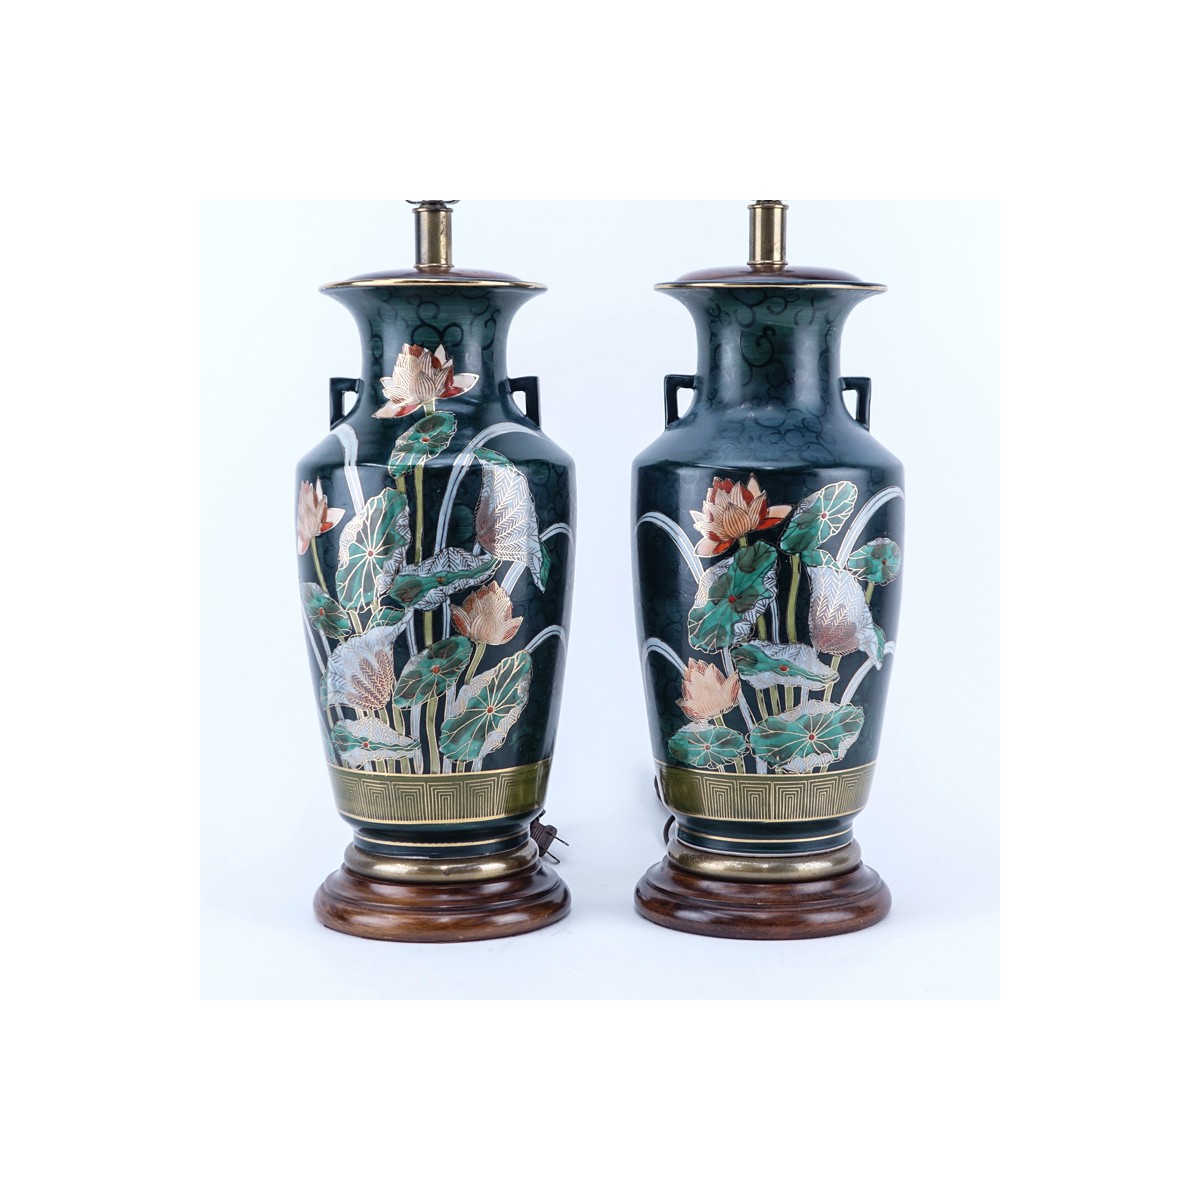 Pair of Japanese Nippon Vases as Lamps. Good condition. Measures 31-1/4" H (w/harp), vase: 15-1/2" 